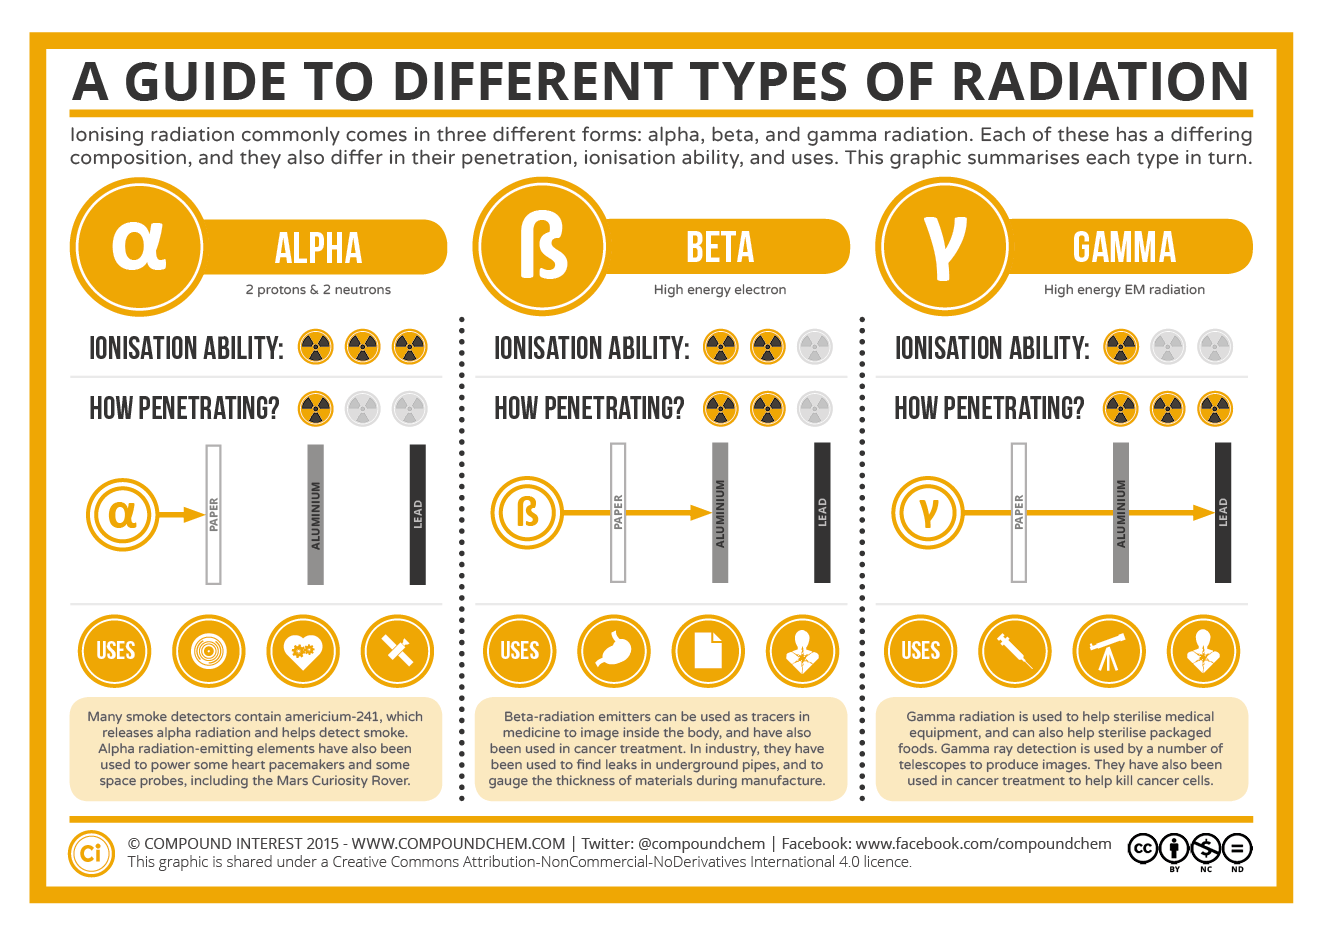 A diagram of a guide to different types of radiation. Alpha radiation has the highest ionisation ability and least penetrating ability. Beta radiation had middle level ionisation and penetrating ability. Gamma radiation has the least ionisation ability, but most penetrating ability.